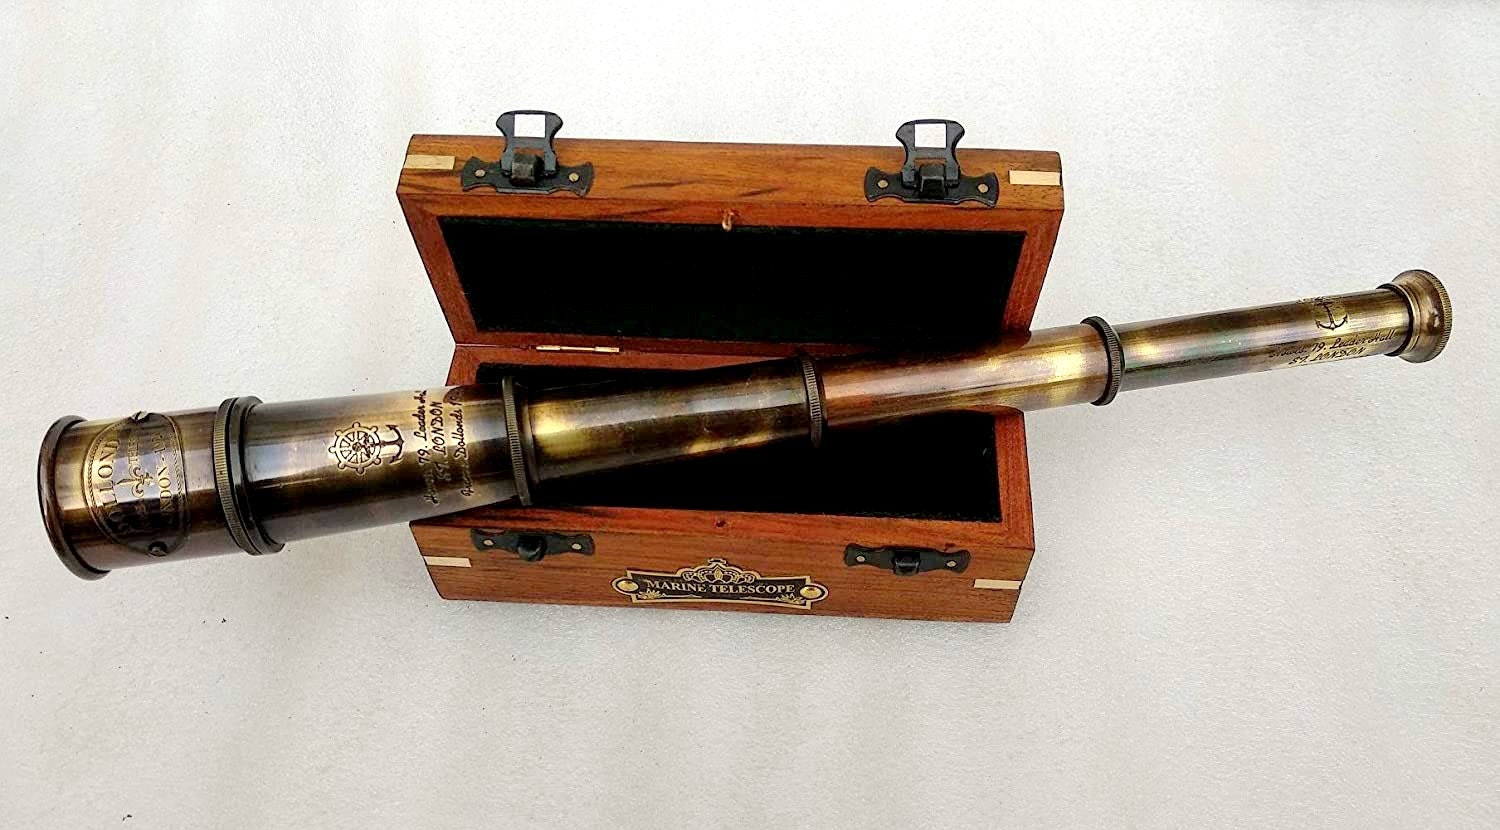 Details about   Antique Brass Dollond London 1920 Marine Telescope With Handmade Wooden Box Gift 